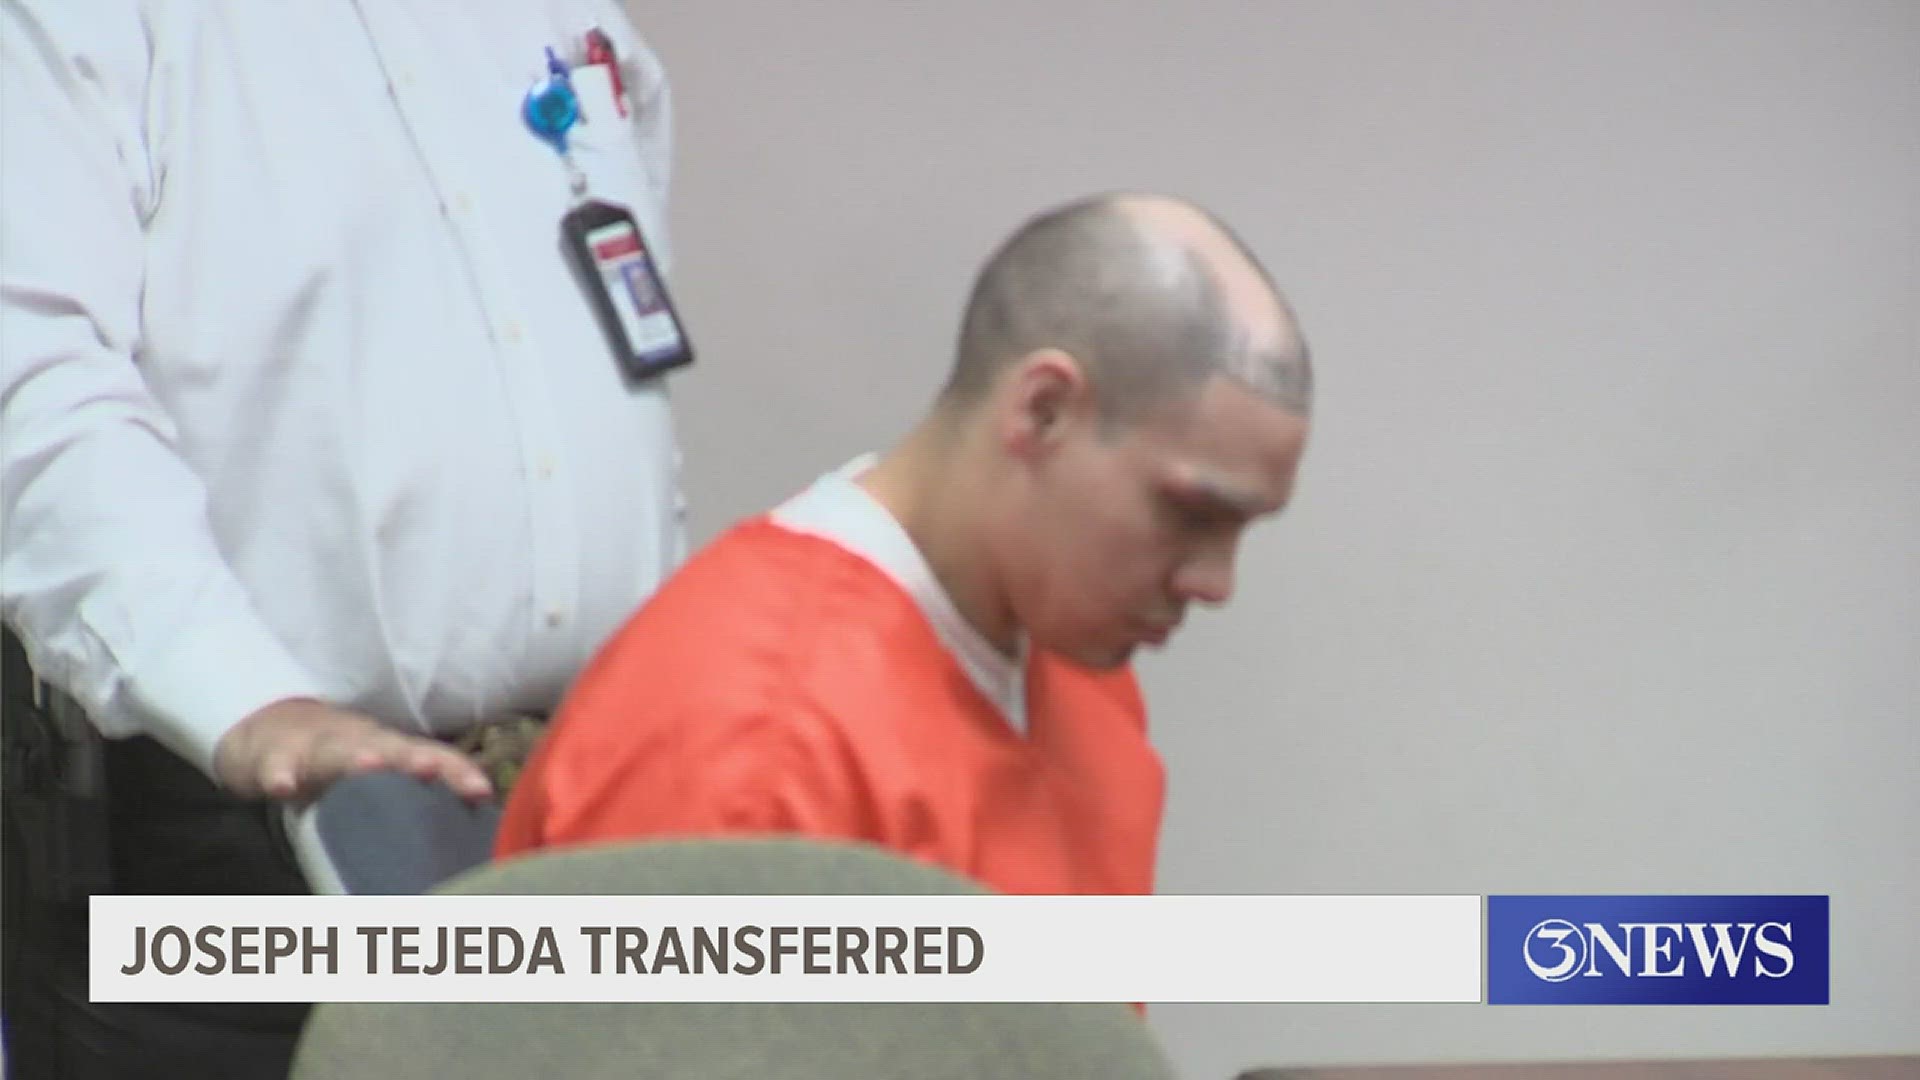 It was just two months ago when Tejeda pleaded guilty to the murder of his ex-girlfriend Breanna Wood.